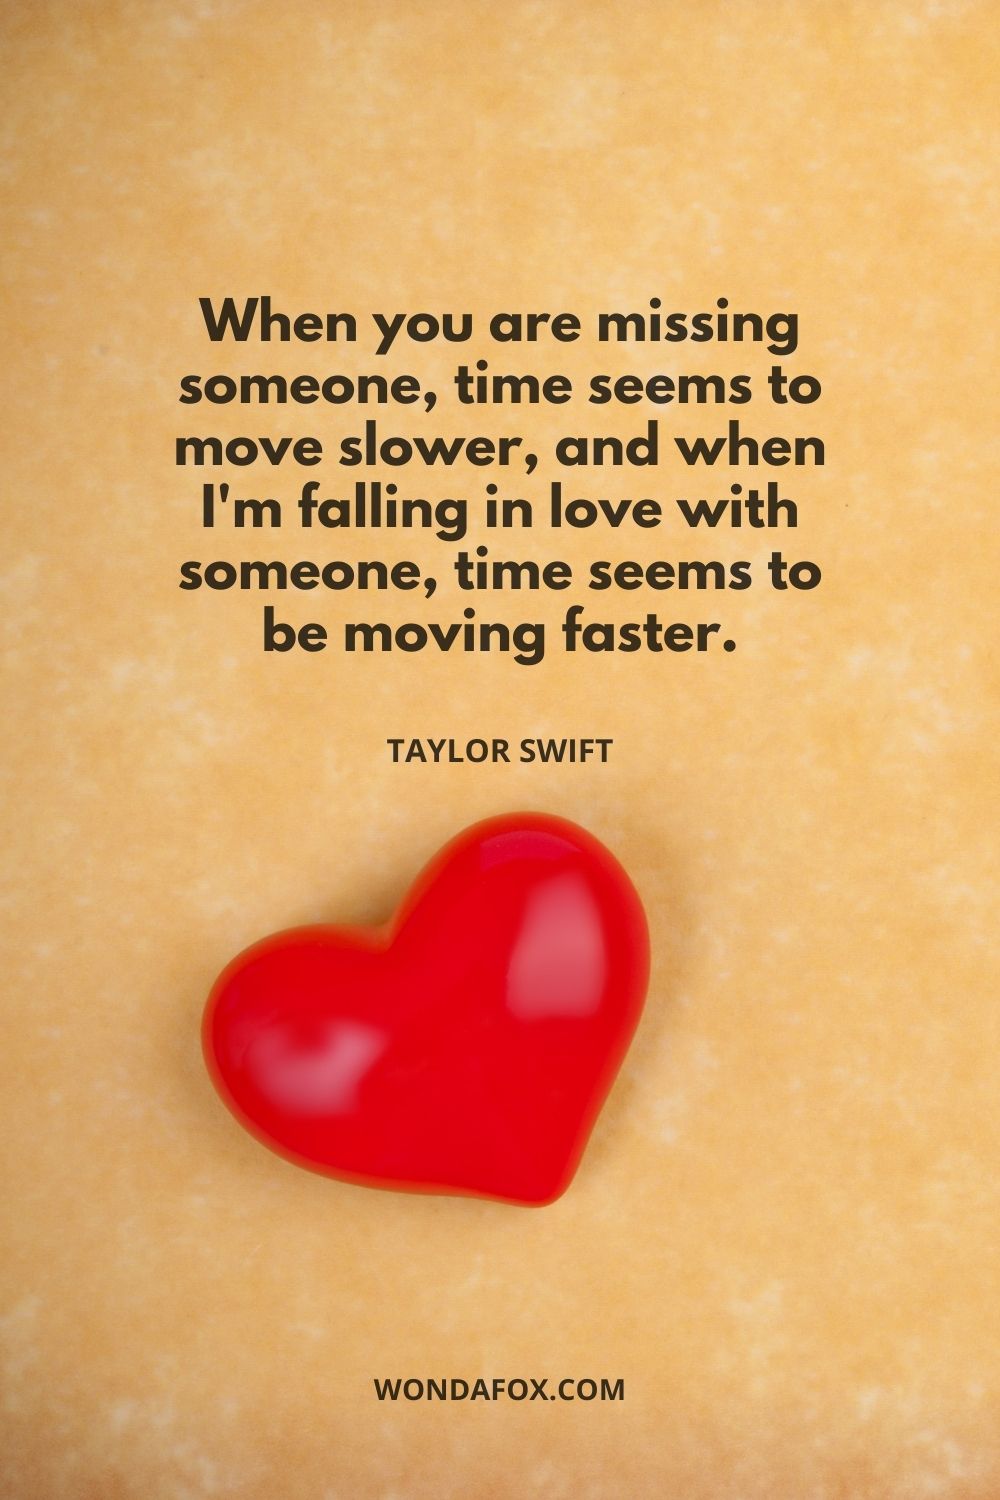 When you are missing someone, time seems to move slower, and when I'm falling in love with someone, time seems to be moving faster.